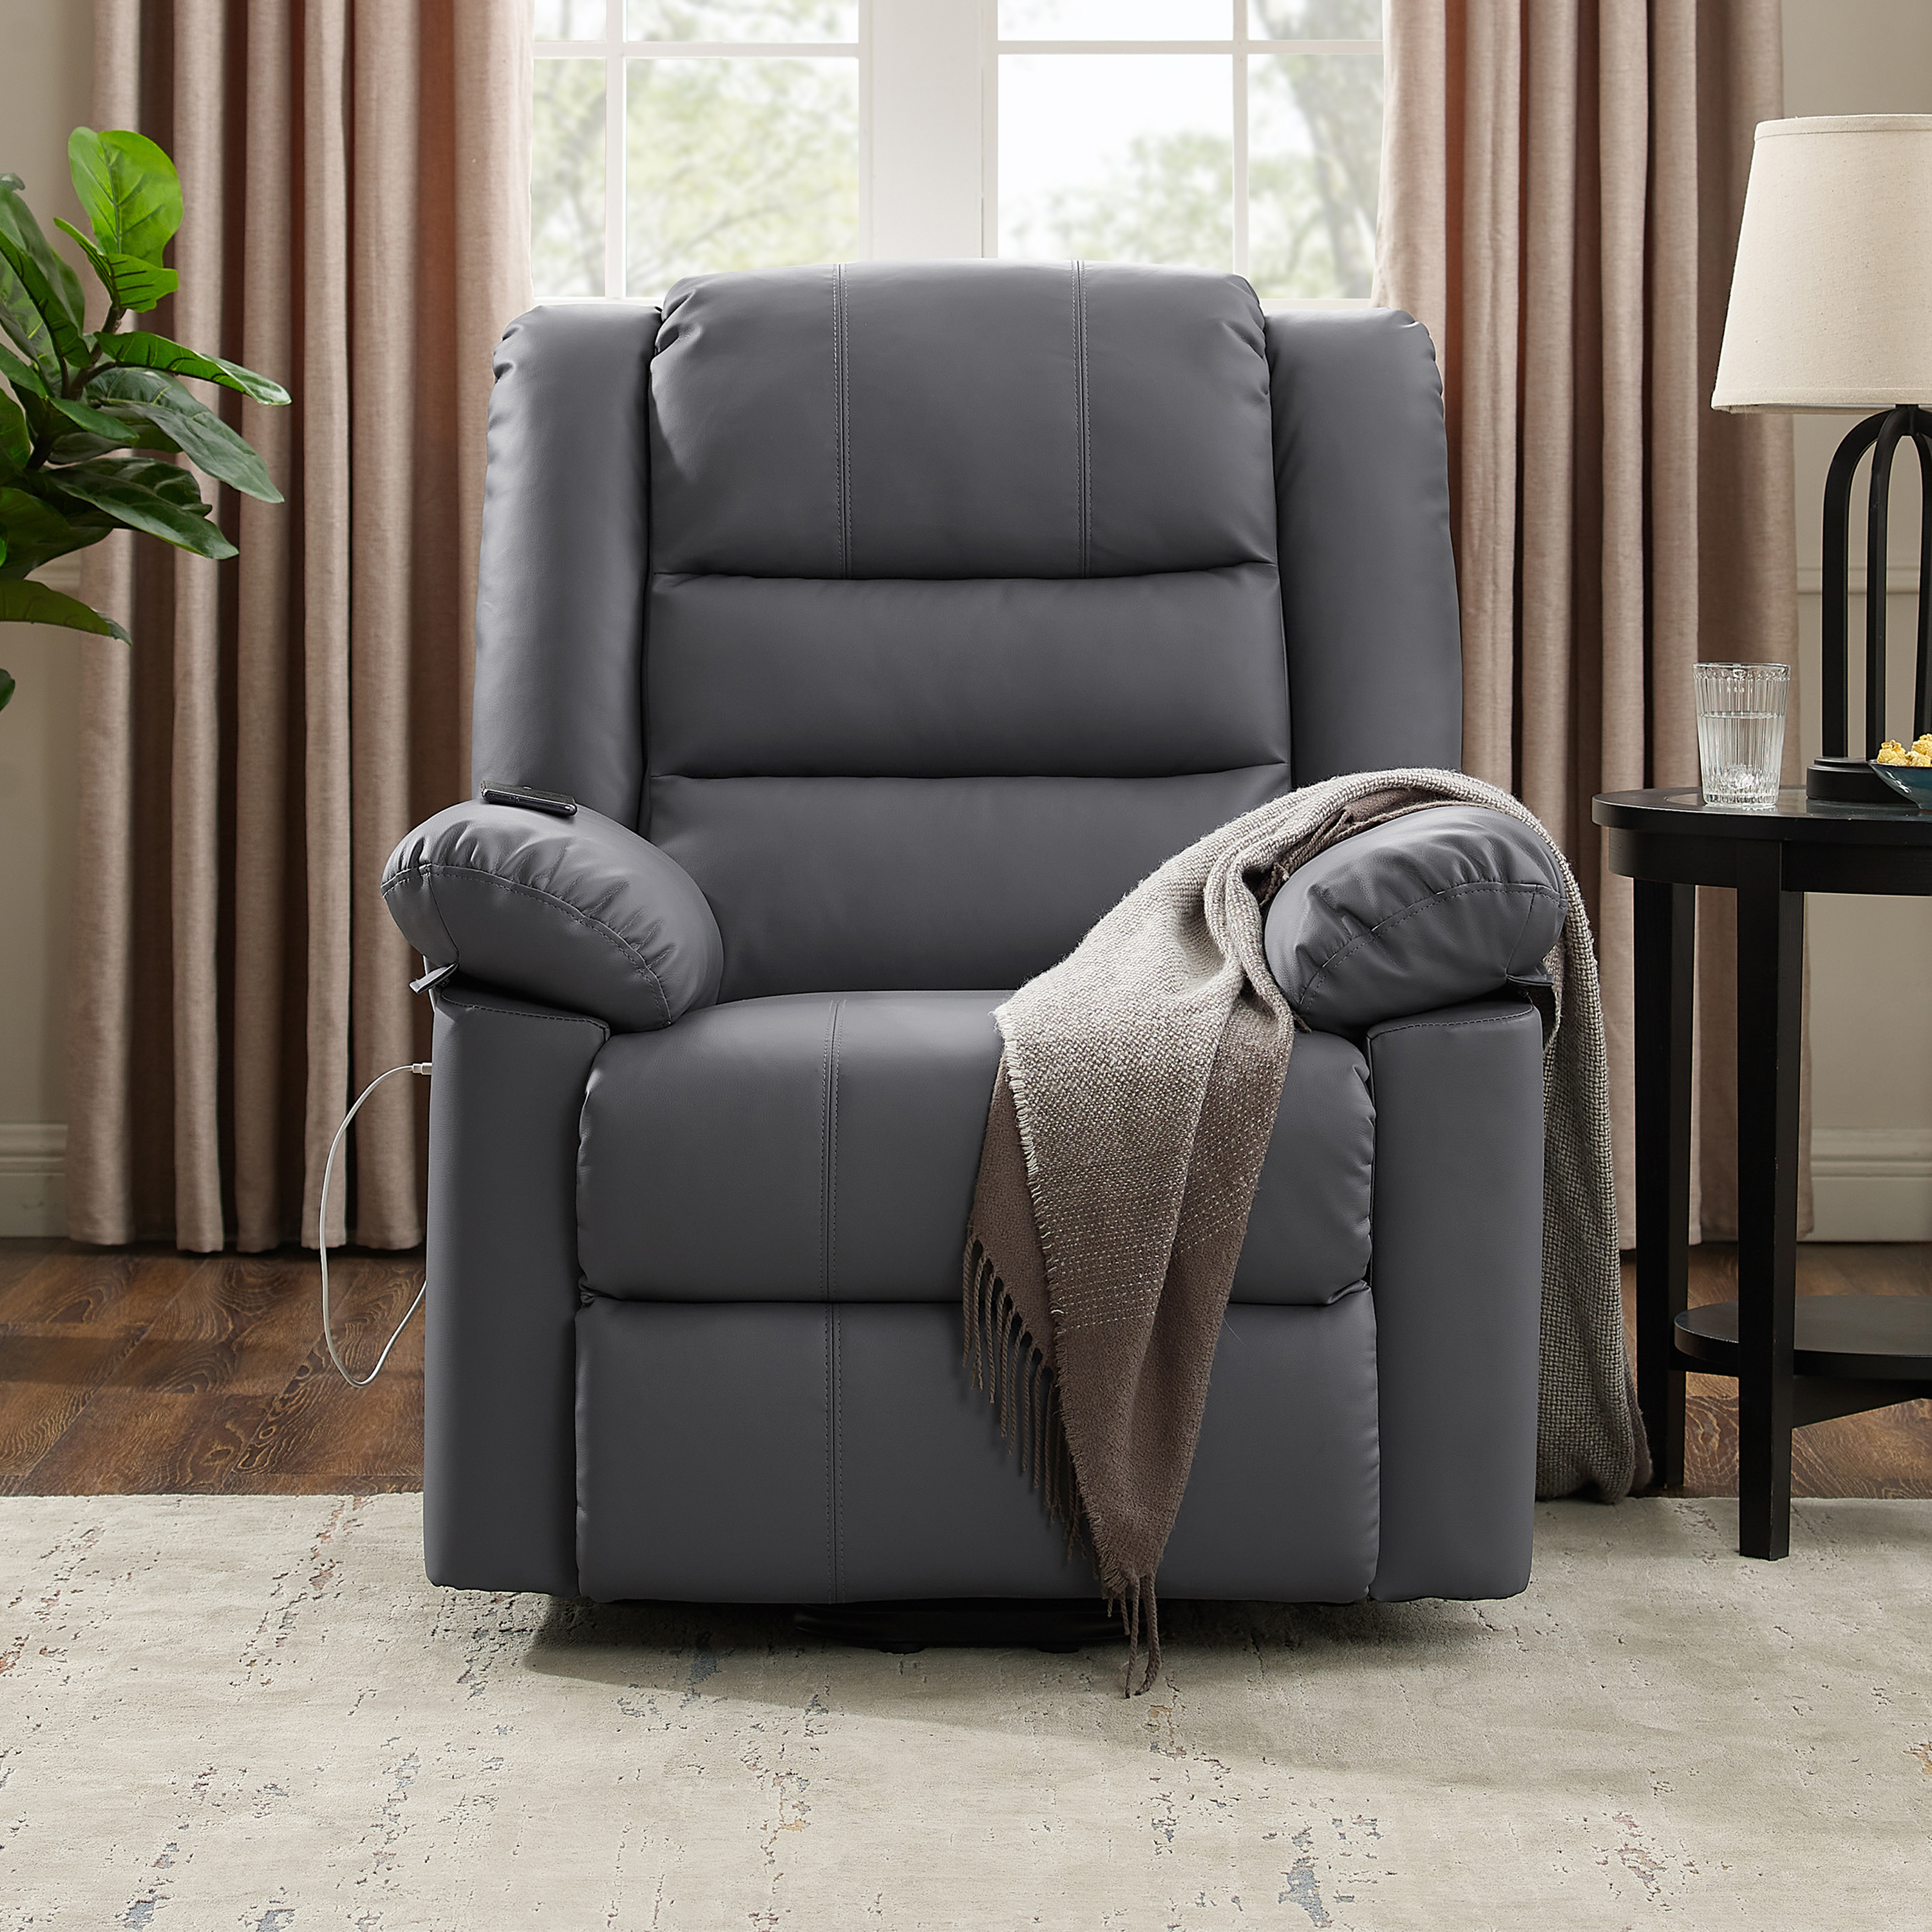 Hillsdale Cedar City Power Lift Faux Leather Recliner with USB, Dusk Gray - image 5 of 23